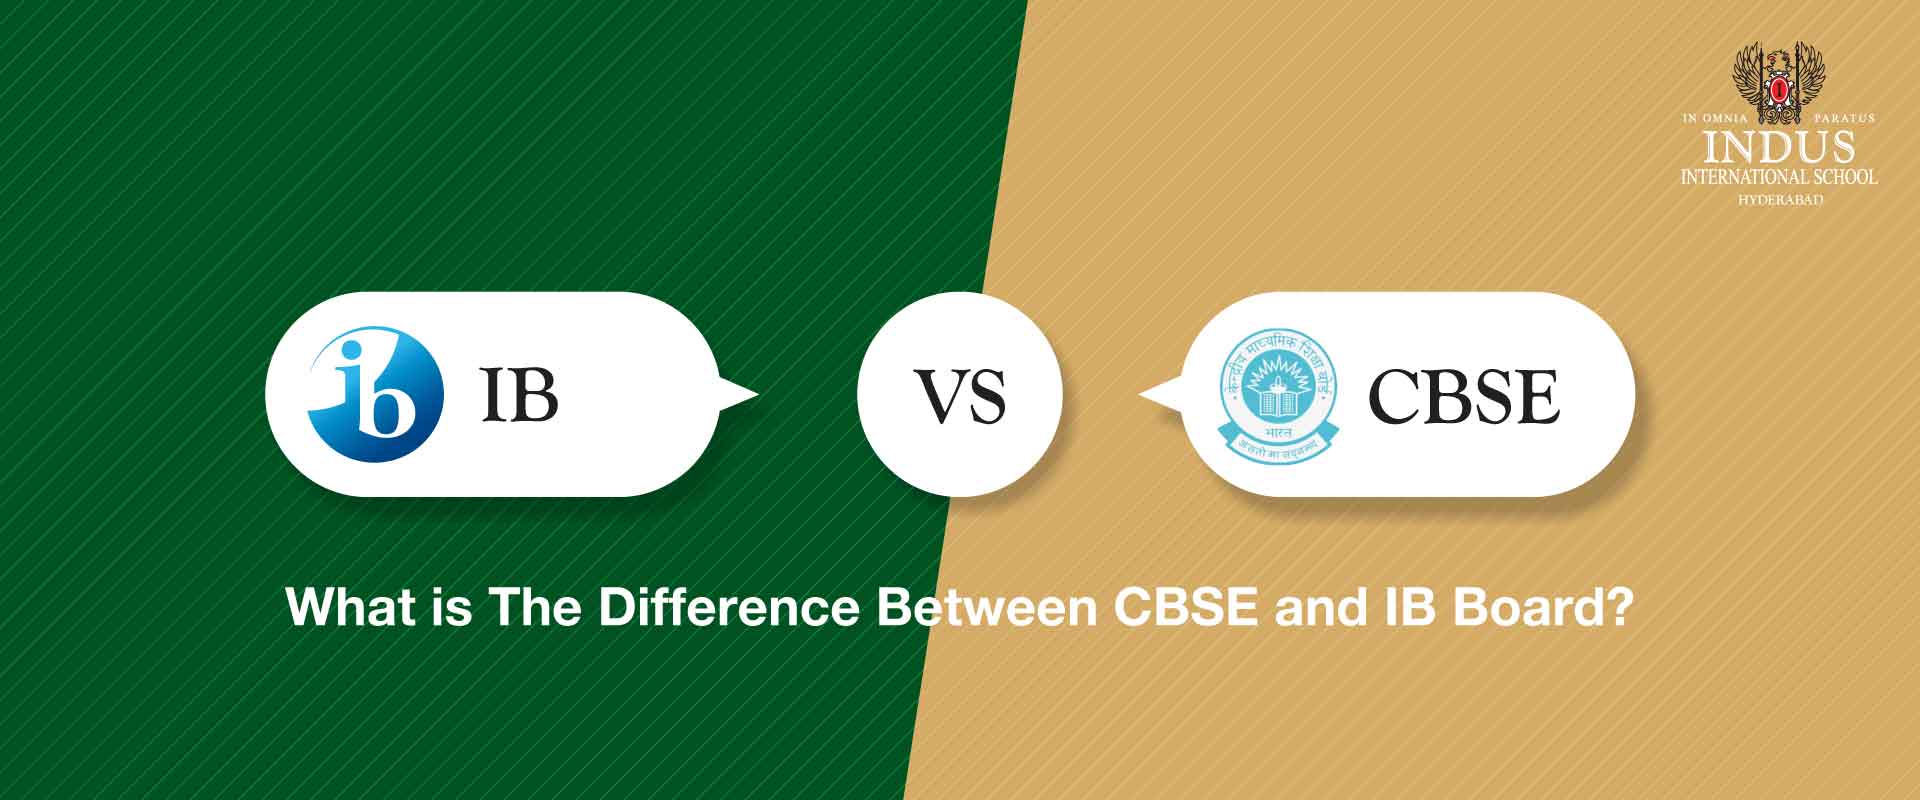 What is The Difference Between CBSE and IB Board?